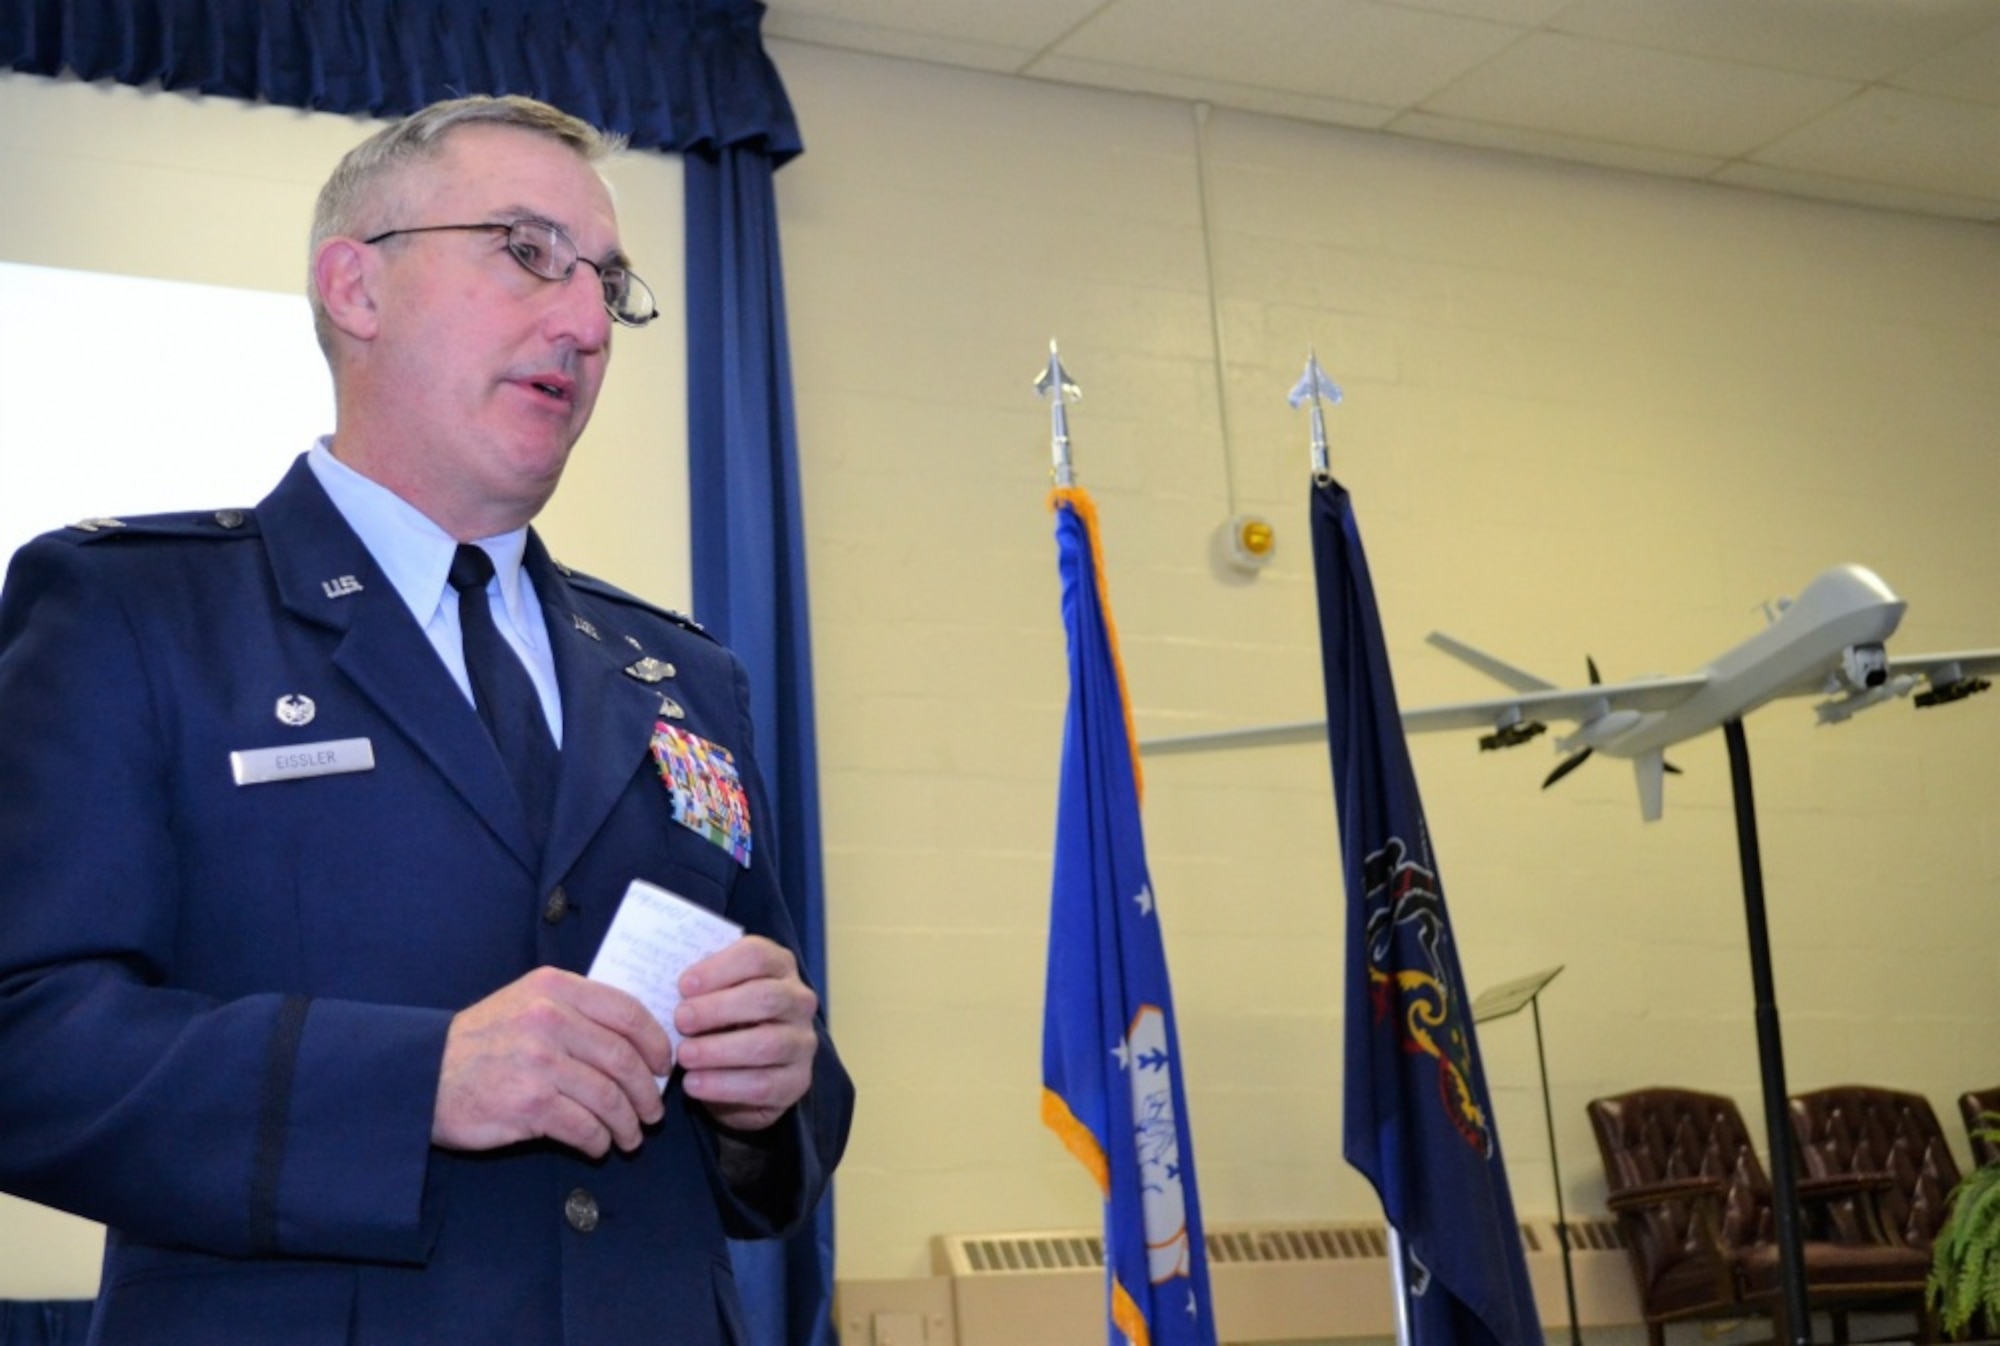 Commander of the 111th Attack Wing Col. Howard Eissler addresses the audience during a change of command ceremony at Horsham Air Guard Station, Pa., Jan. 7, 2017. Eissler commands an Air National Guard wing that includes RED HORSE, remotely-piloted aircraft and cyberspace operations units. (U.S. Air National Guard photo by Tech. Sgt. Andria Allmond)